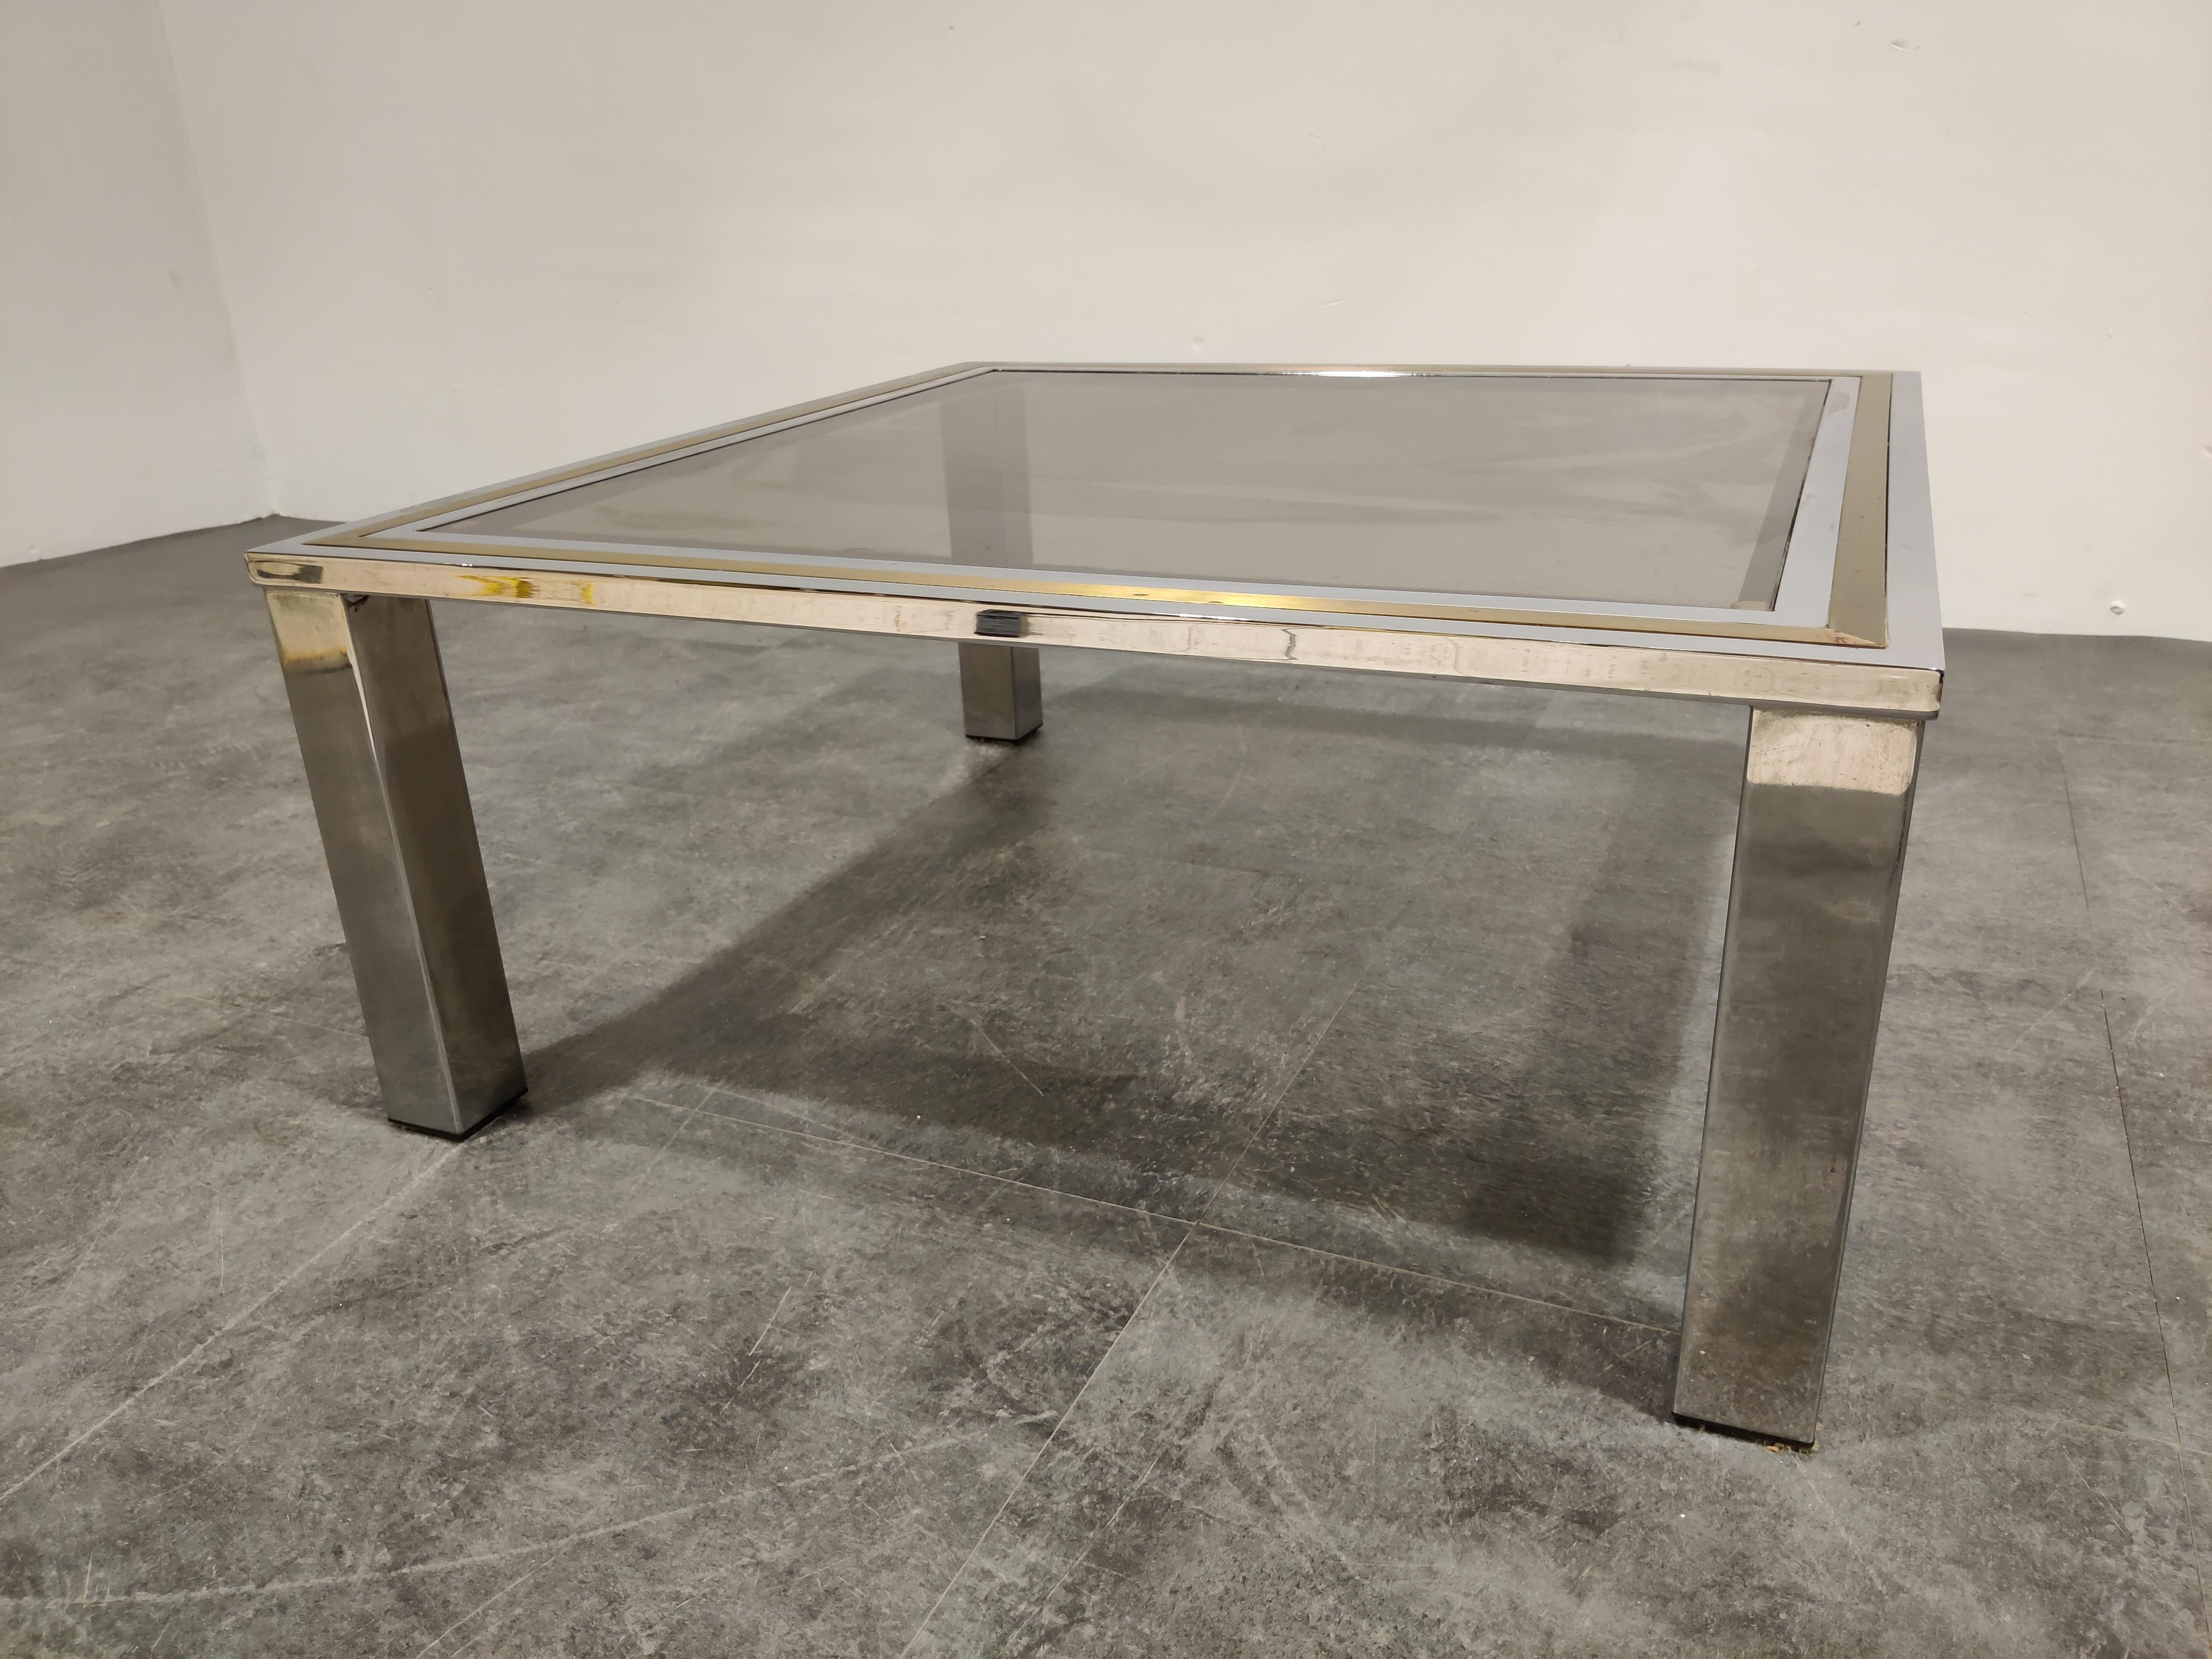 Chrome and brass coffee table with a smoked glass top in the style of Willy Rizzo or Romeo Rega

Hollywood regency style.

Condition: Patina on the brass/chrome, original glass top with minor scratches,

1970s, Belgium

Dimensions:
Height